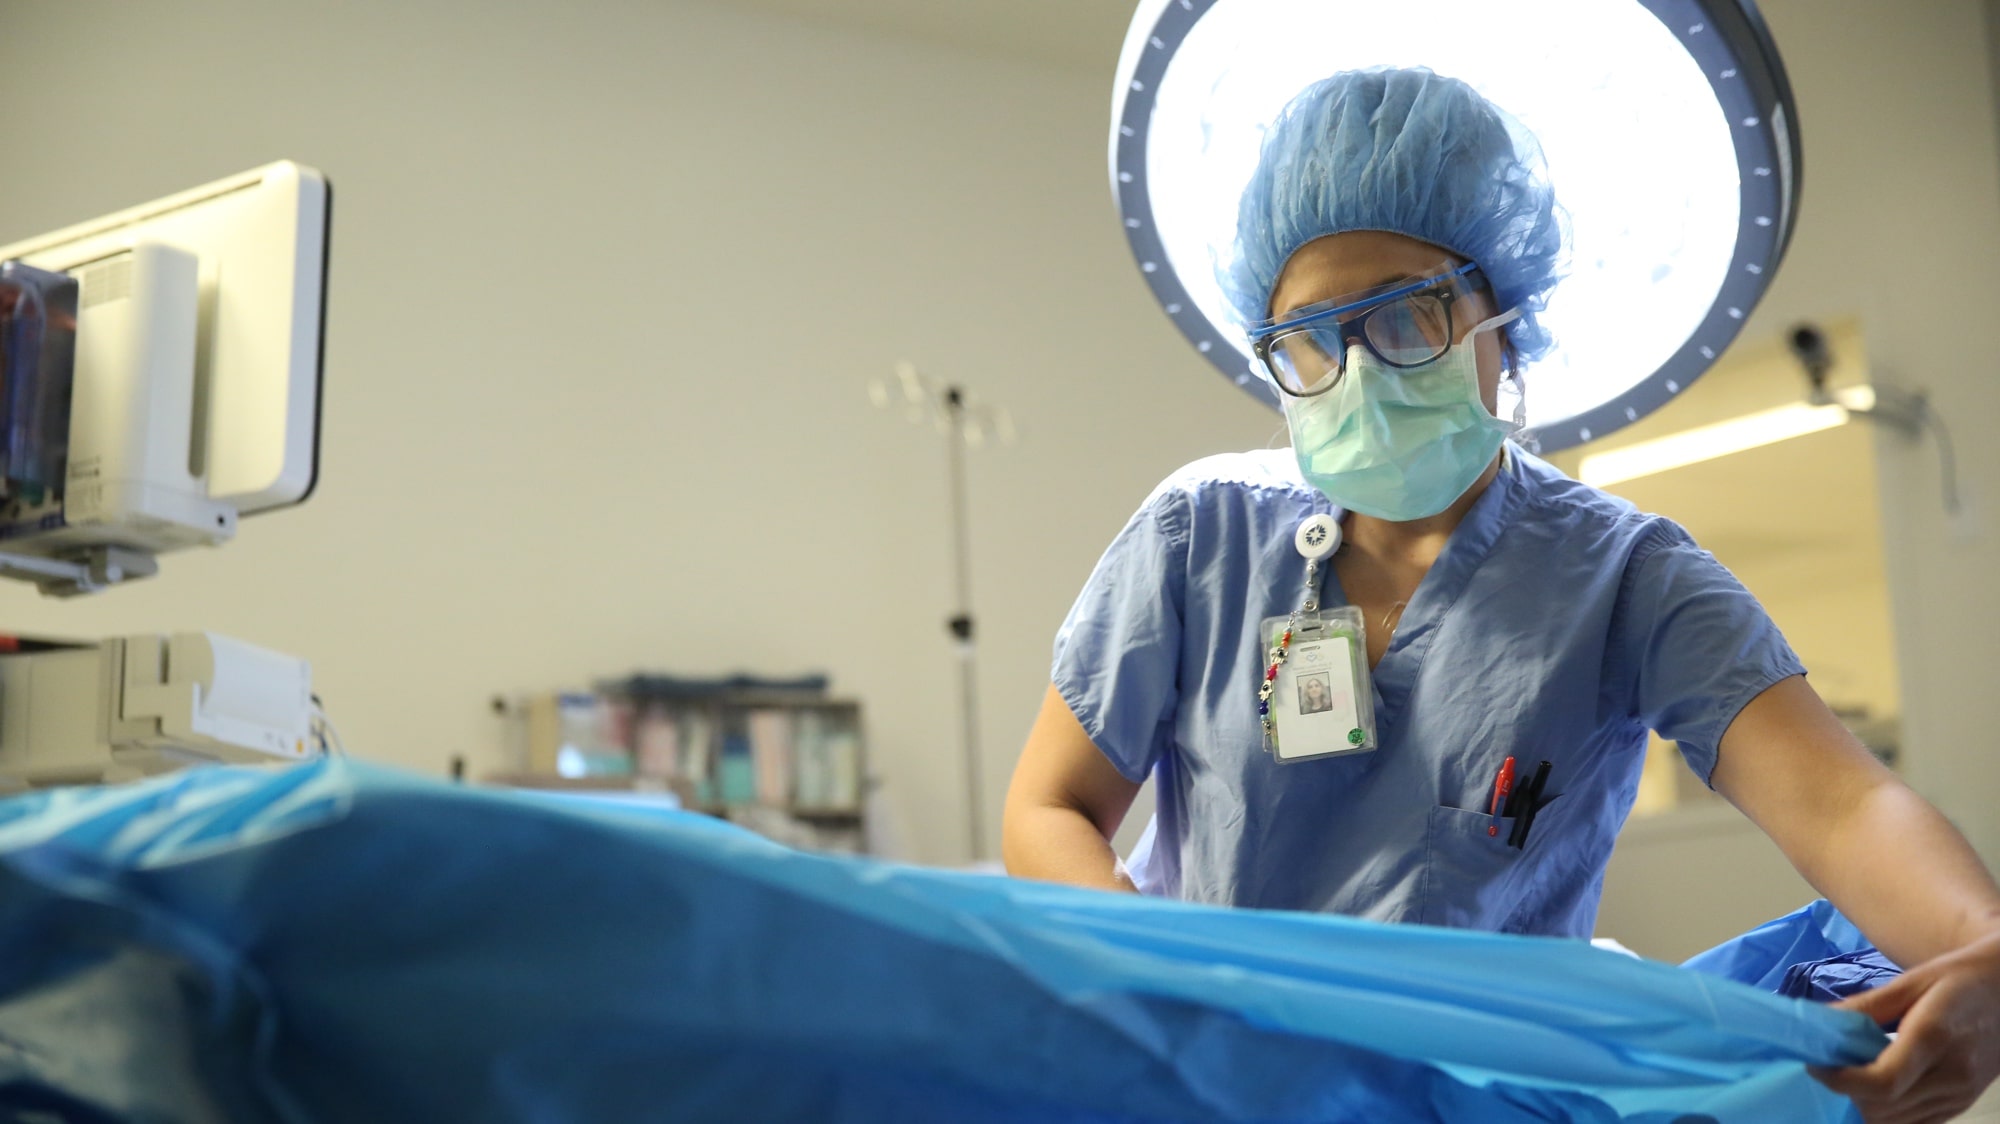 Female nurse in blue scrubs and protective gear in operating room